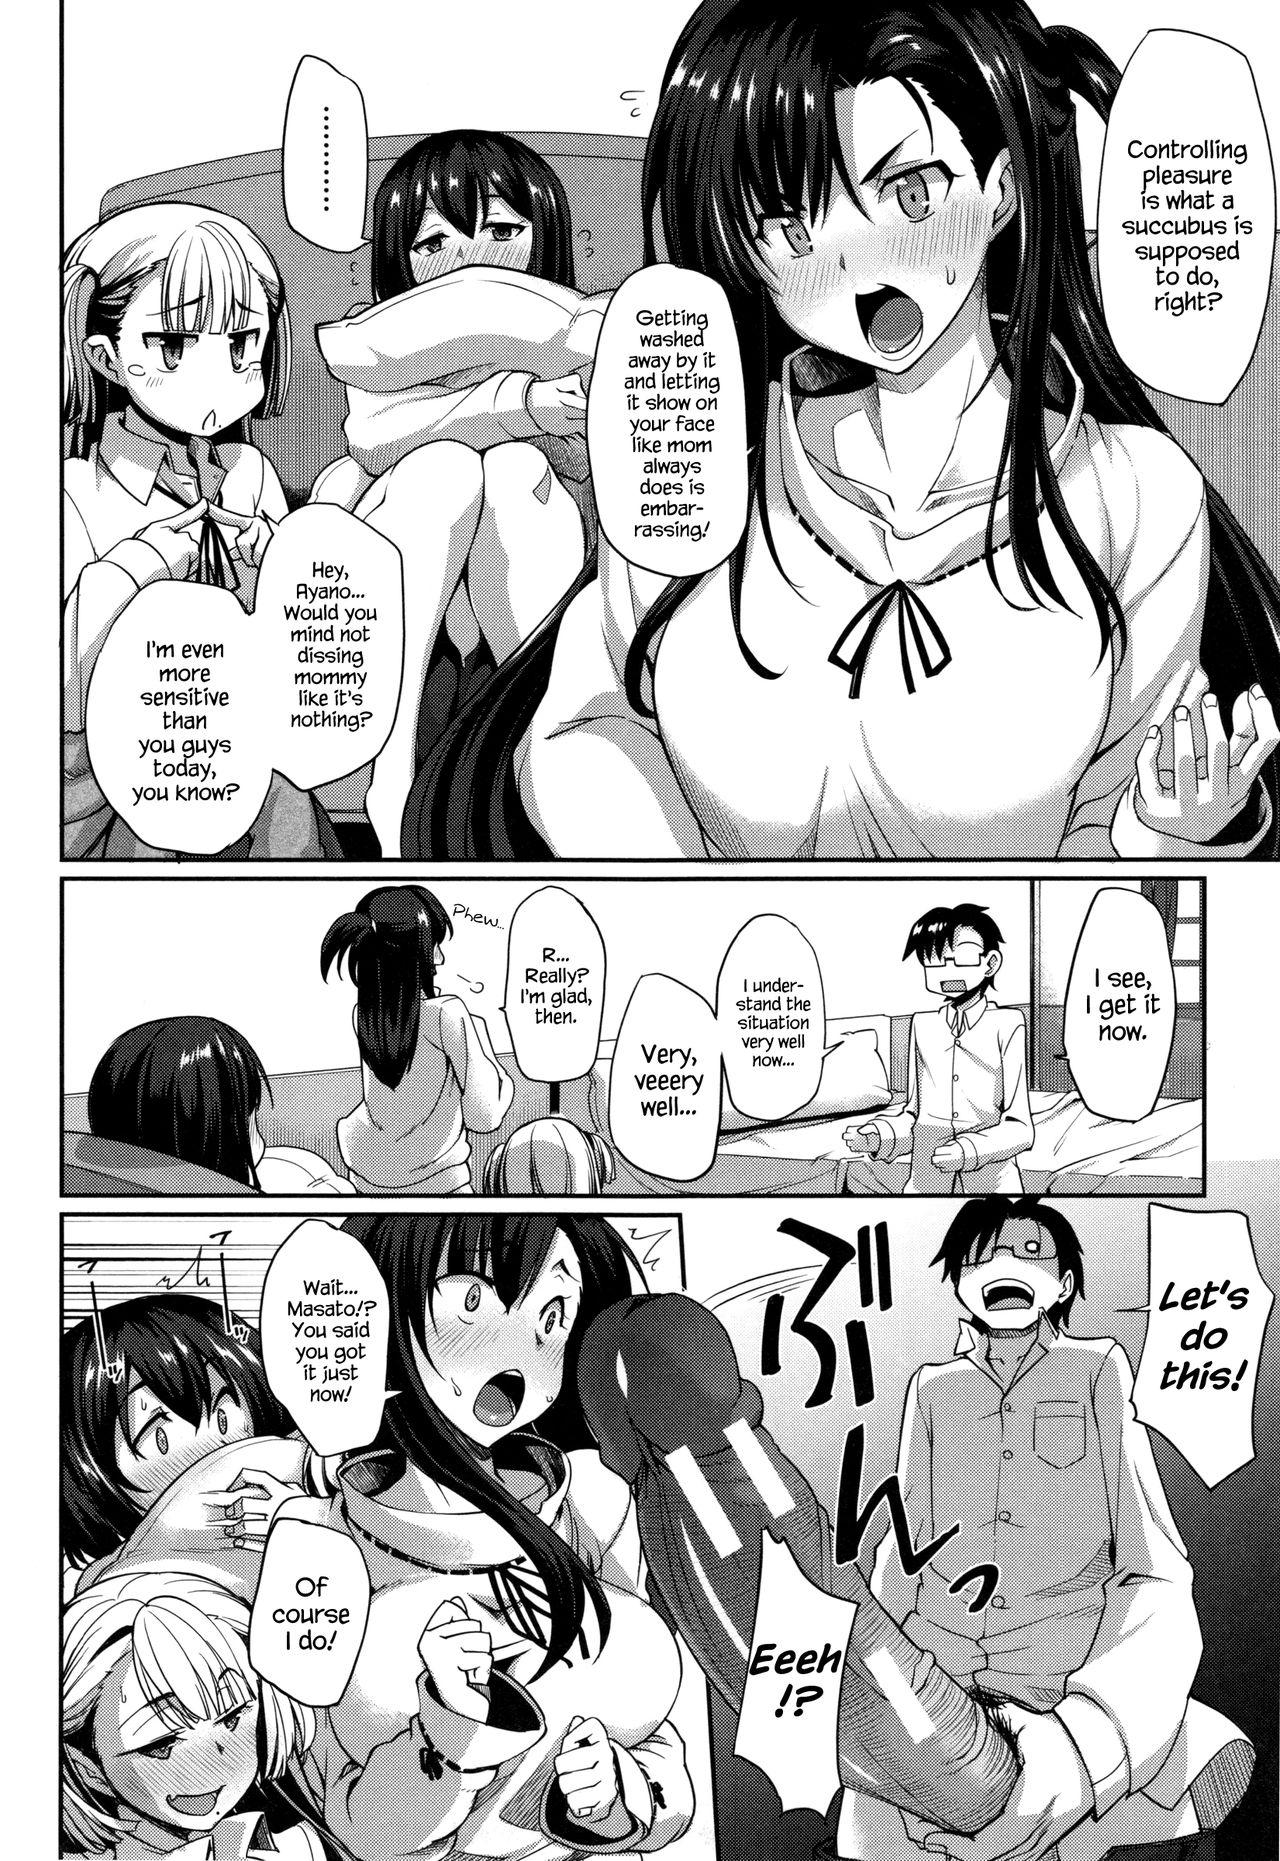 Leaked Inma no Mikata! | Succubi’s Supporter! Ch. 6 Lingerie - Page 4